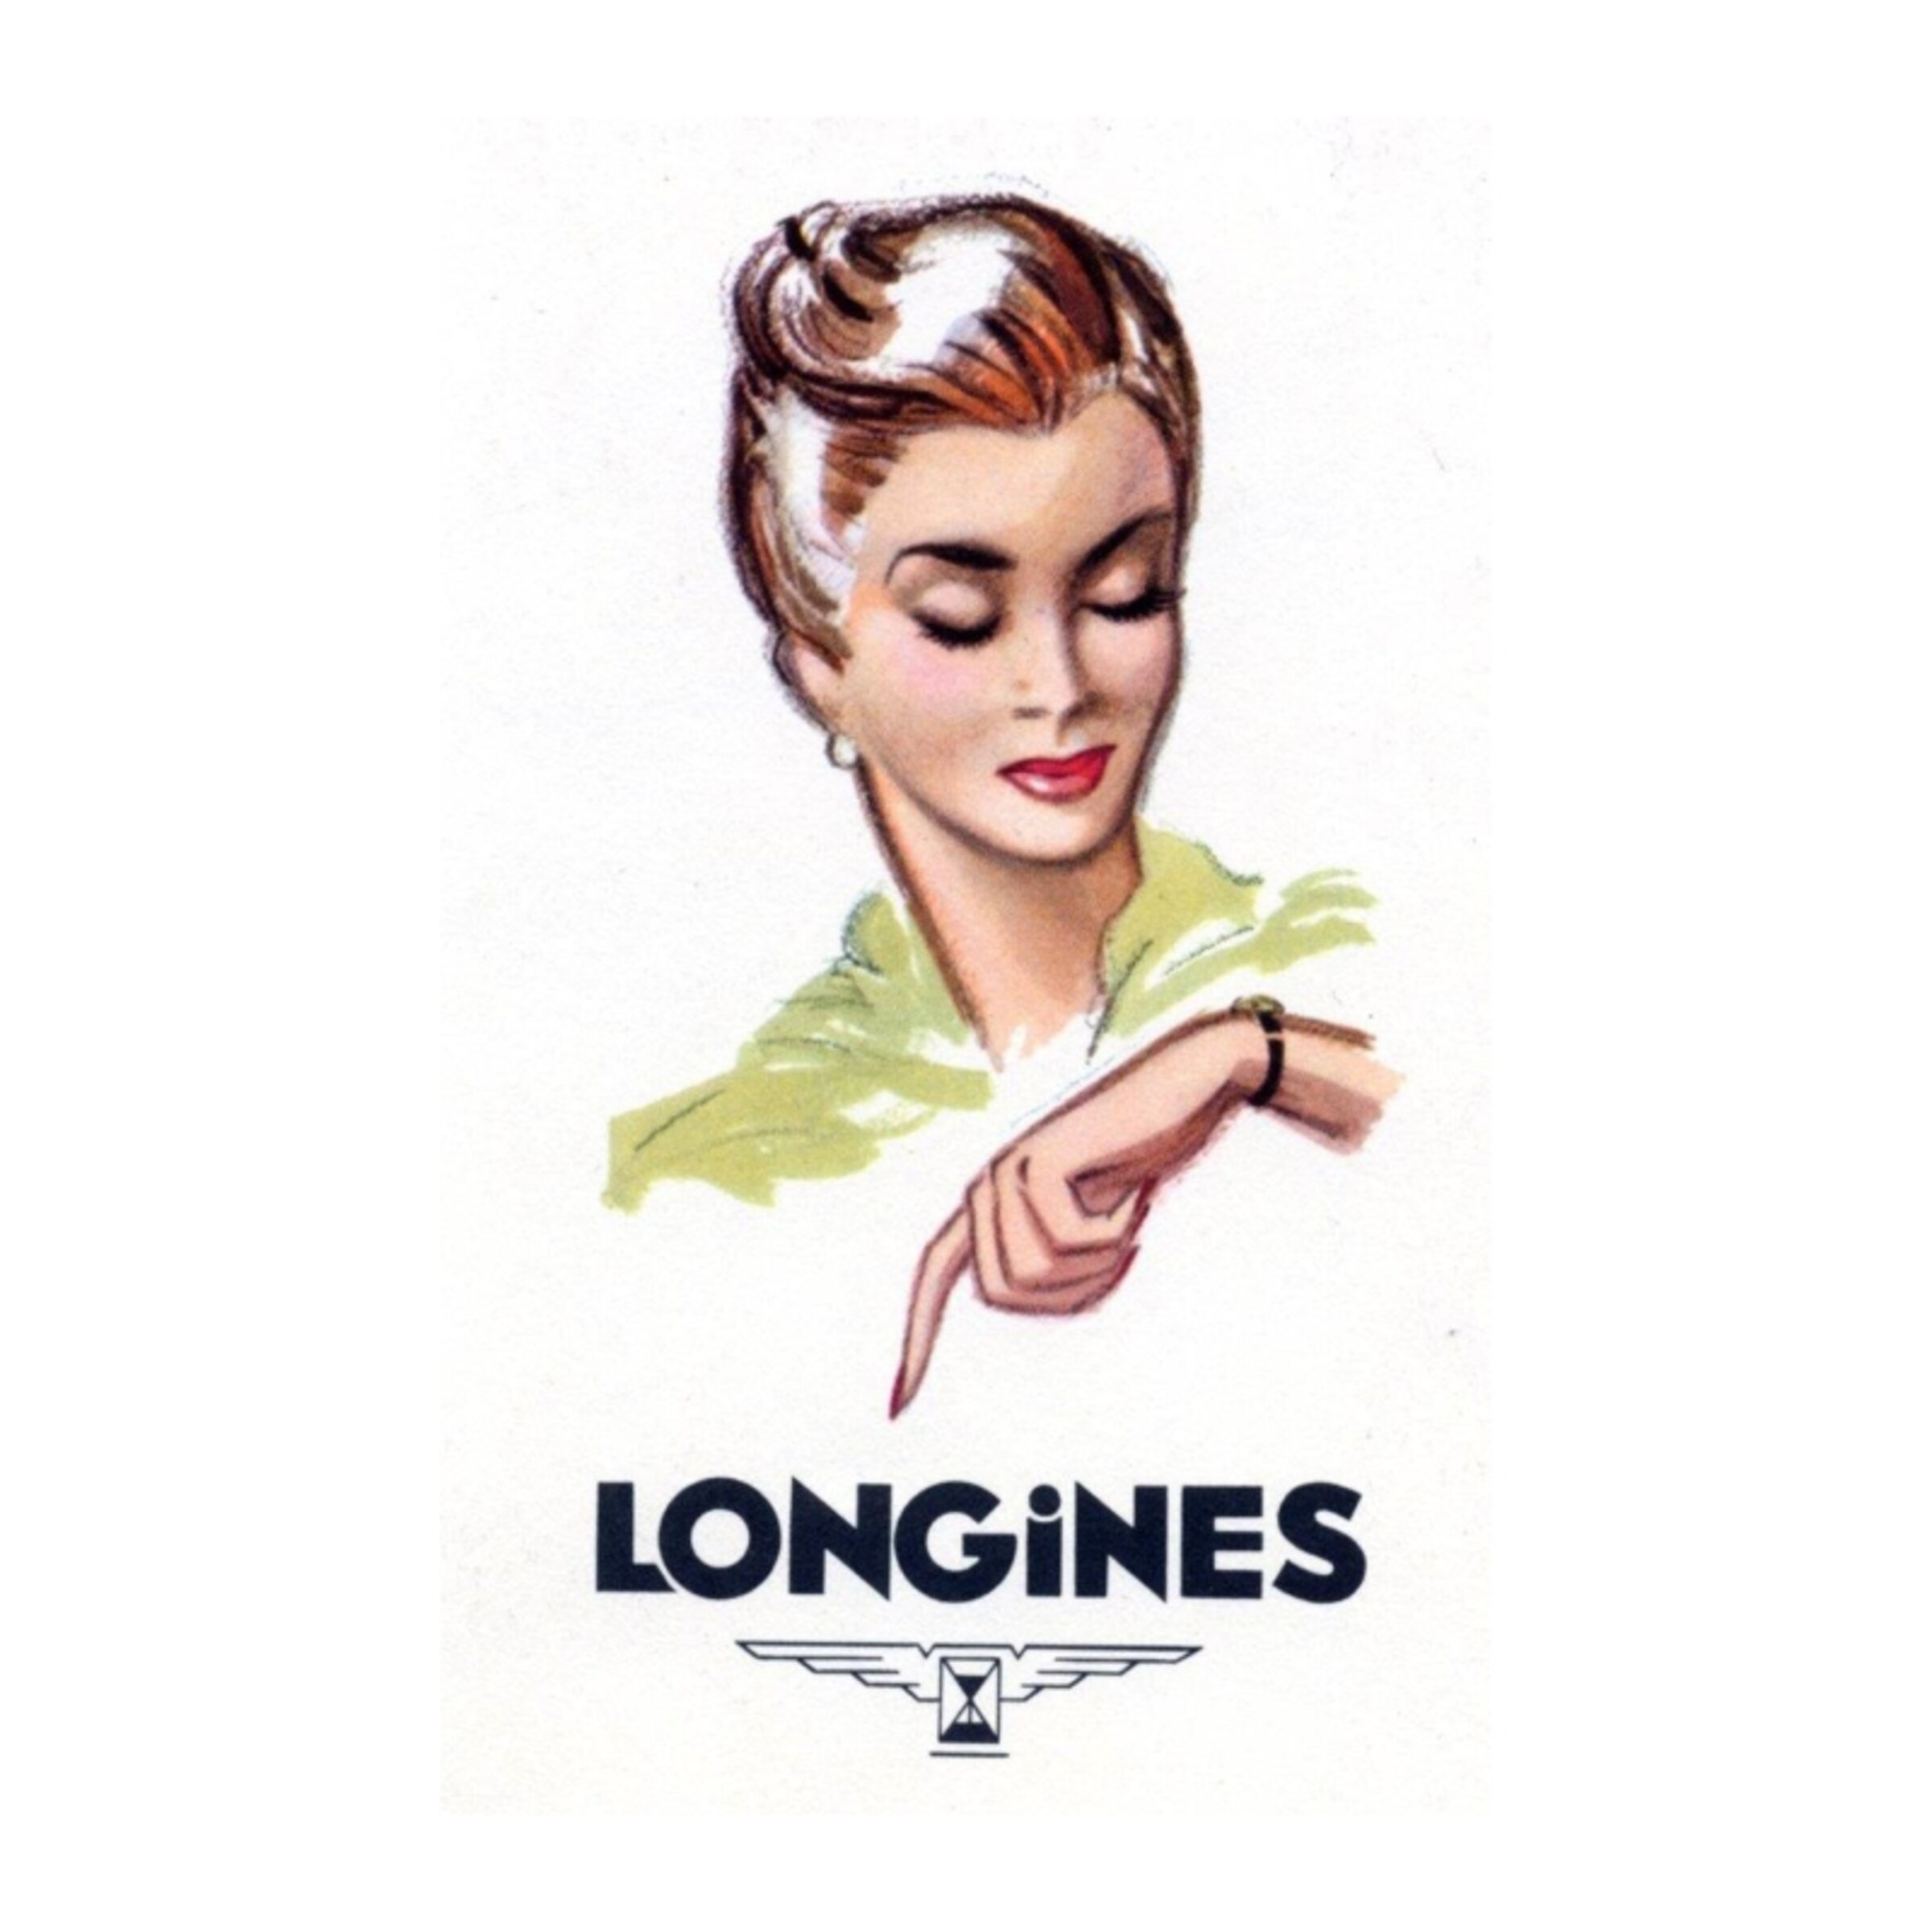 longines-rose-gold-square-watch-1950-galerie-2